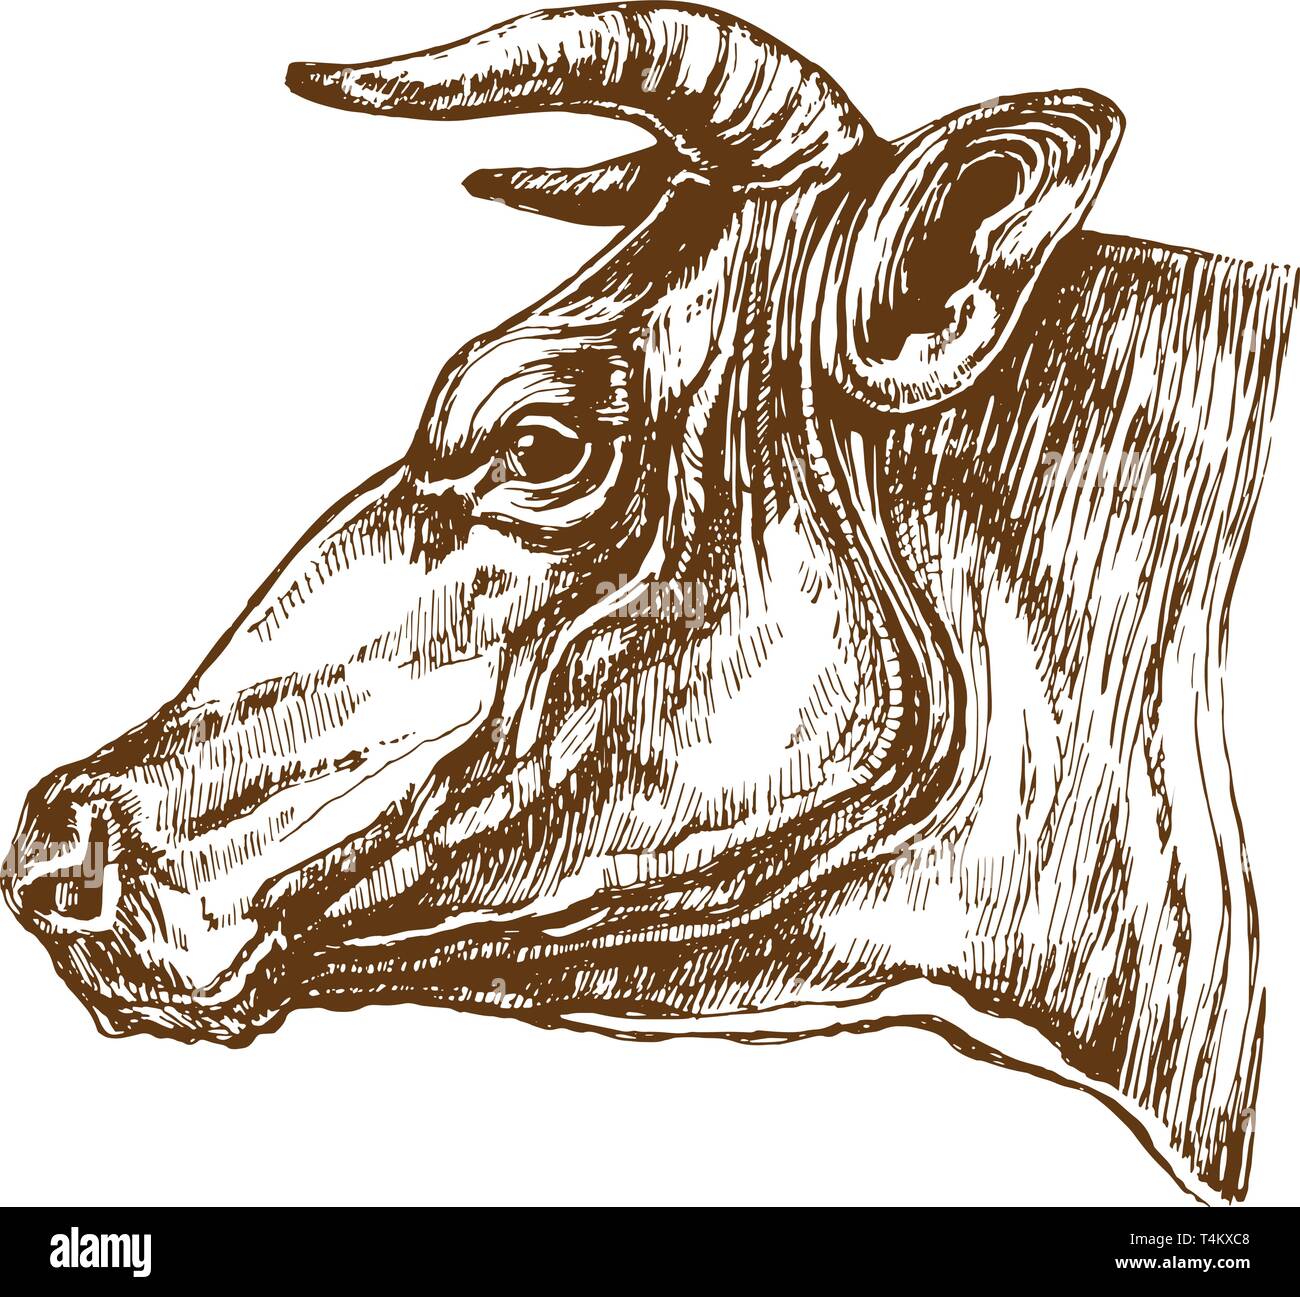 Outline Drawing of the Head and Neck of a Bull Side View, Simple